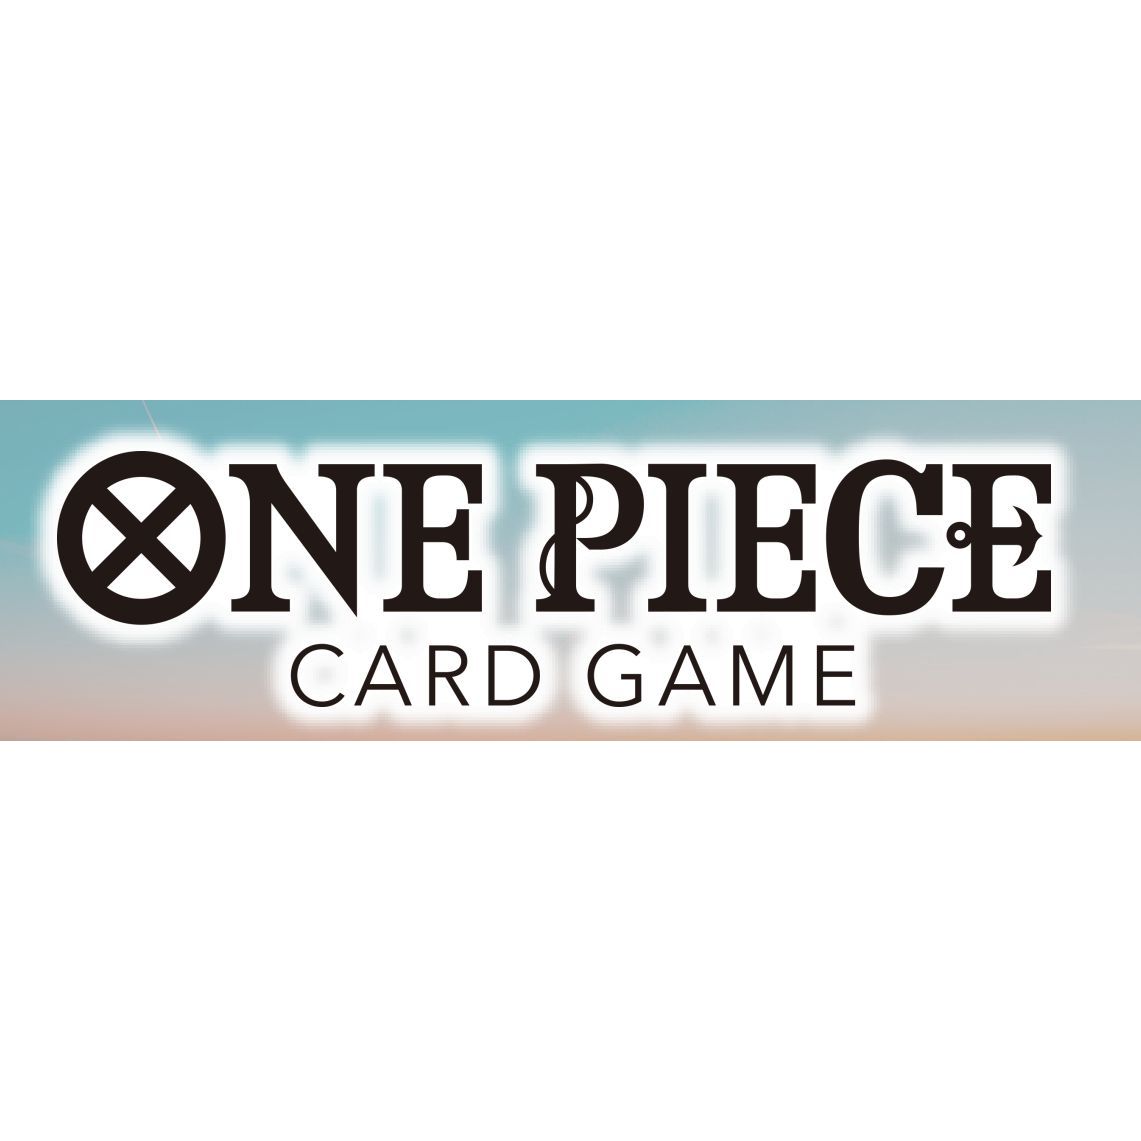 One Piece Card Game - Pillars of Strength OP-03 Booster Box - English